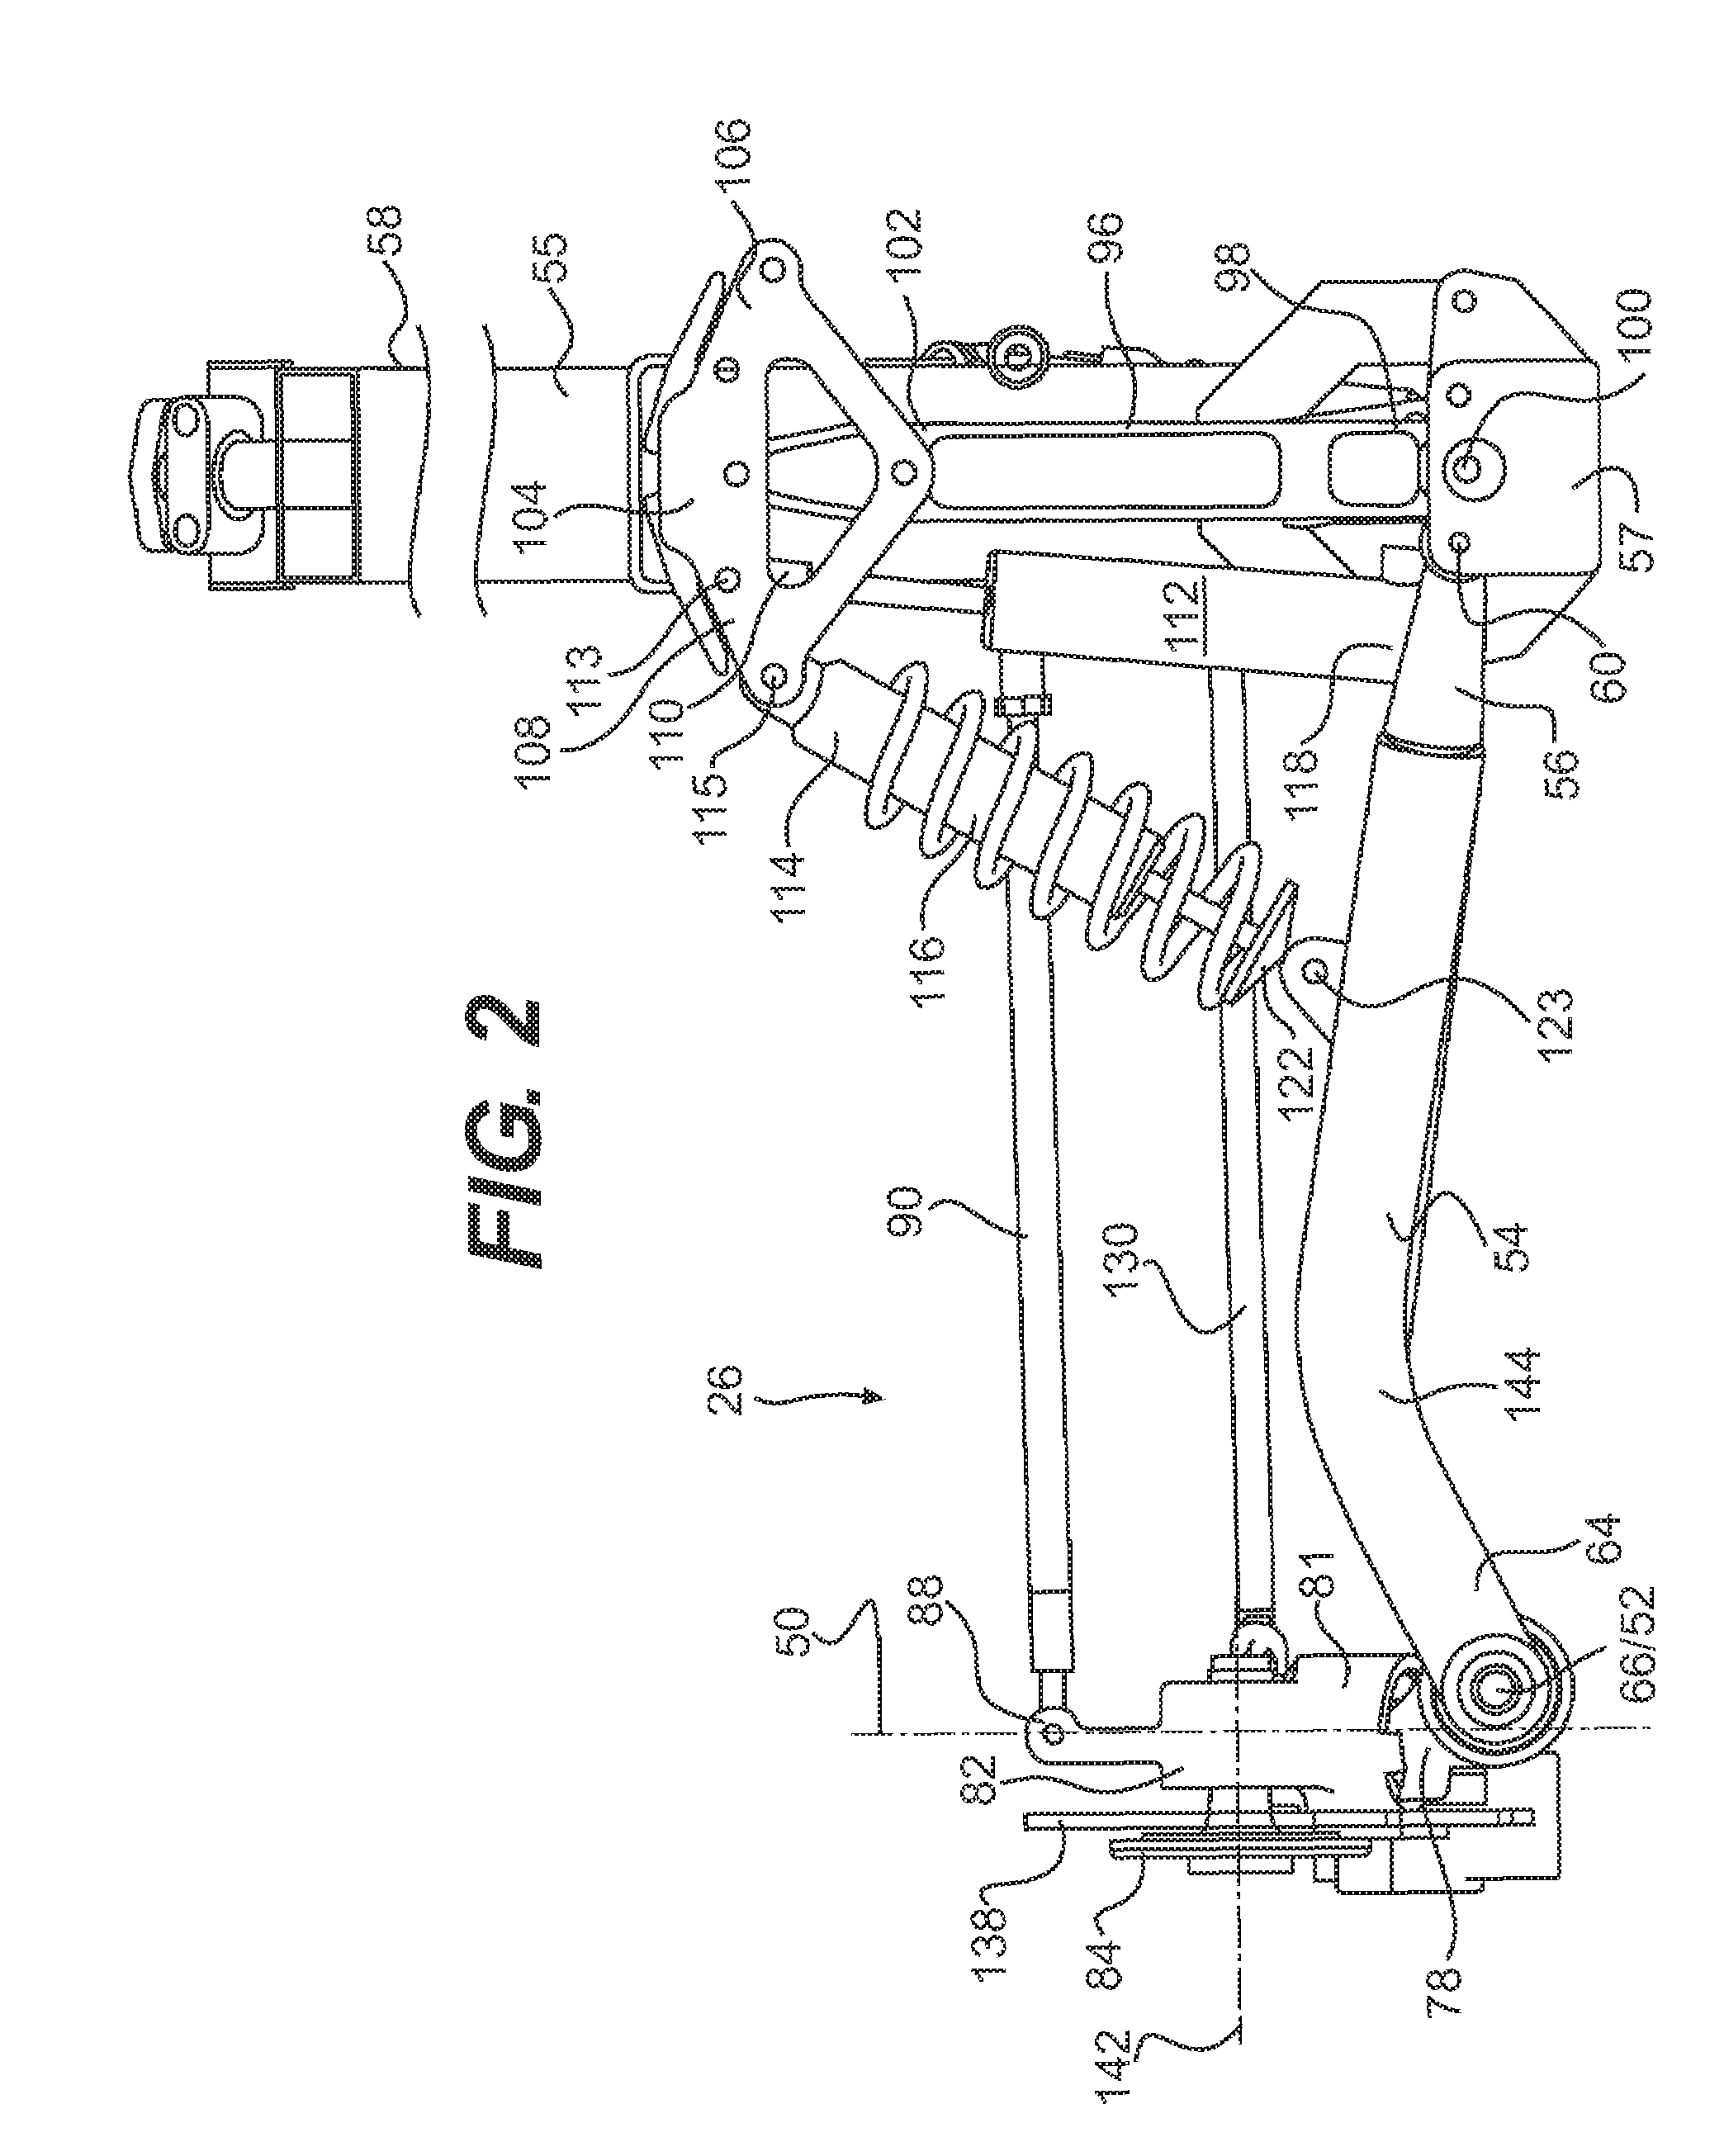 Leaning vehicle with tilting front wheels and suspension therefor